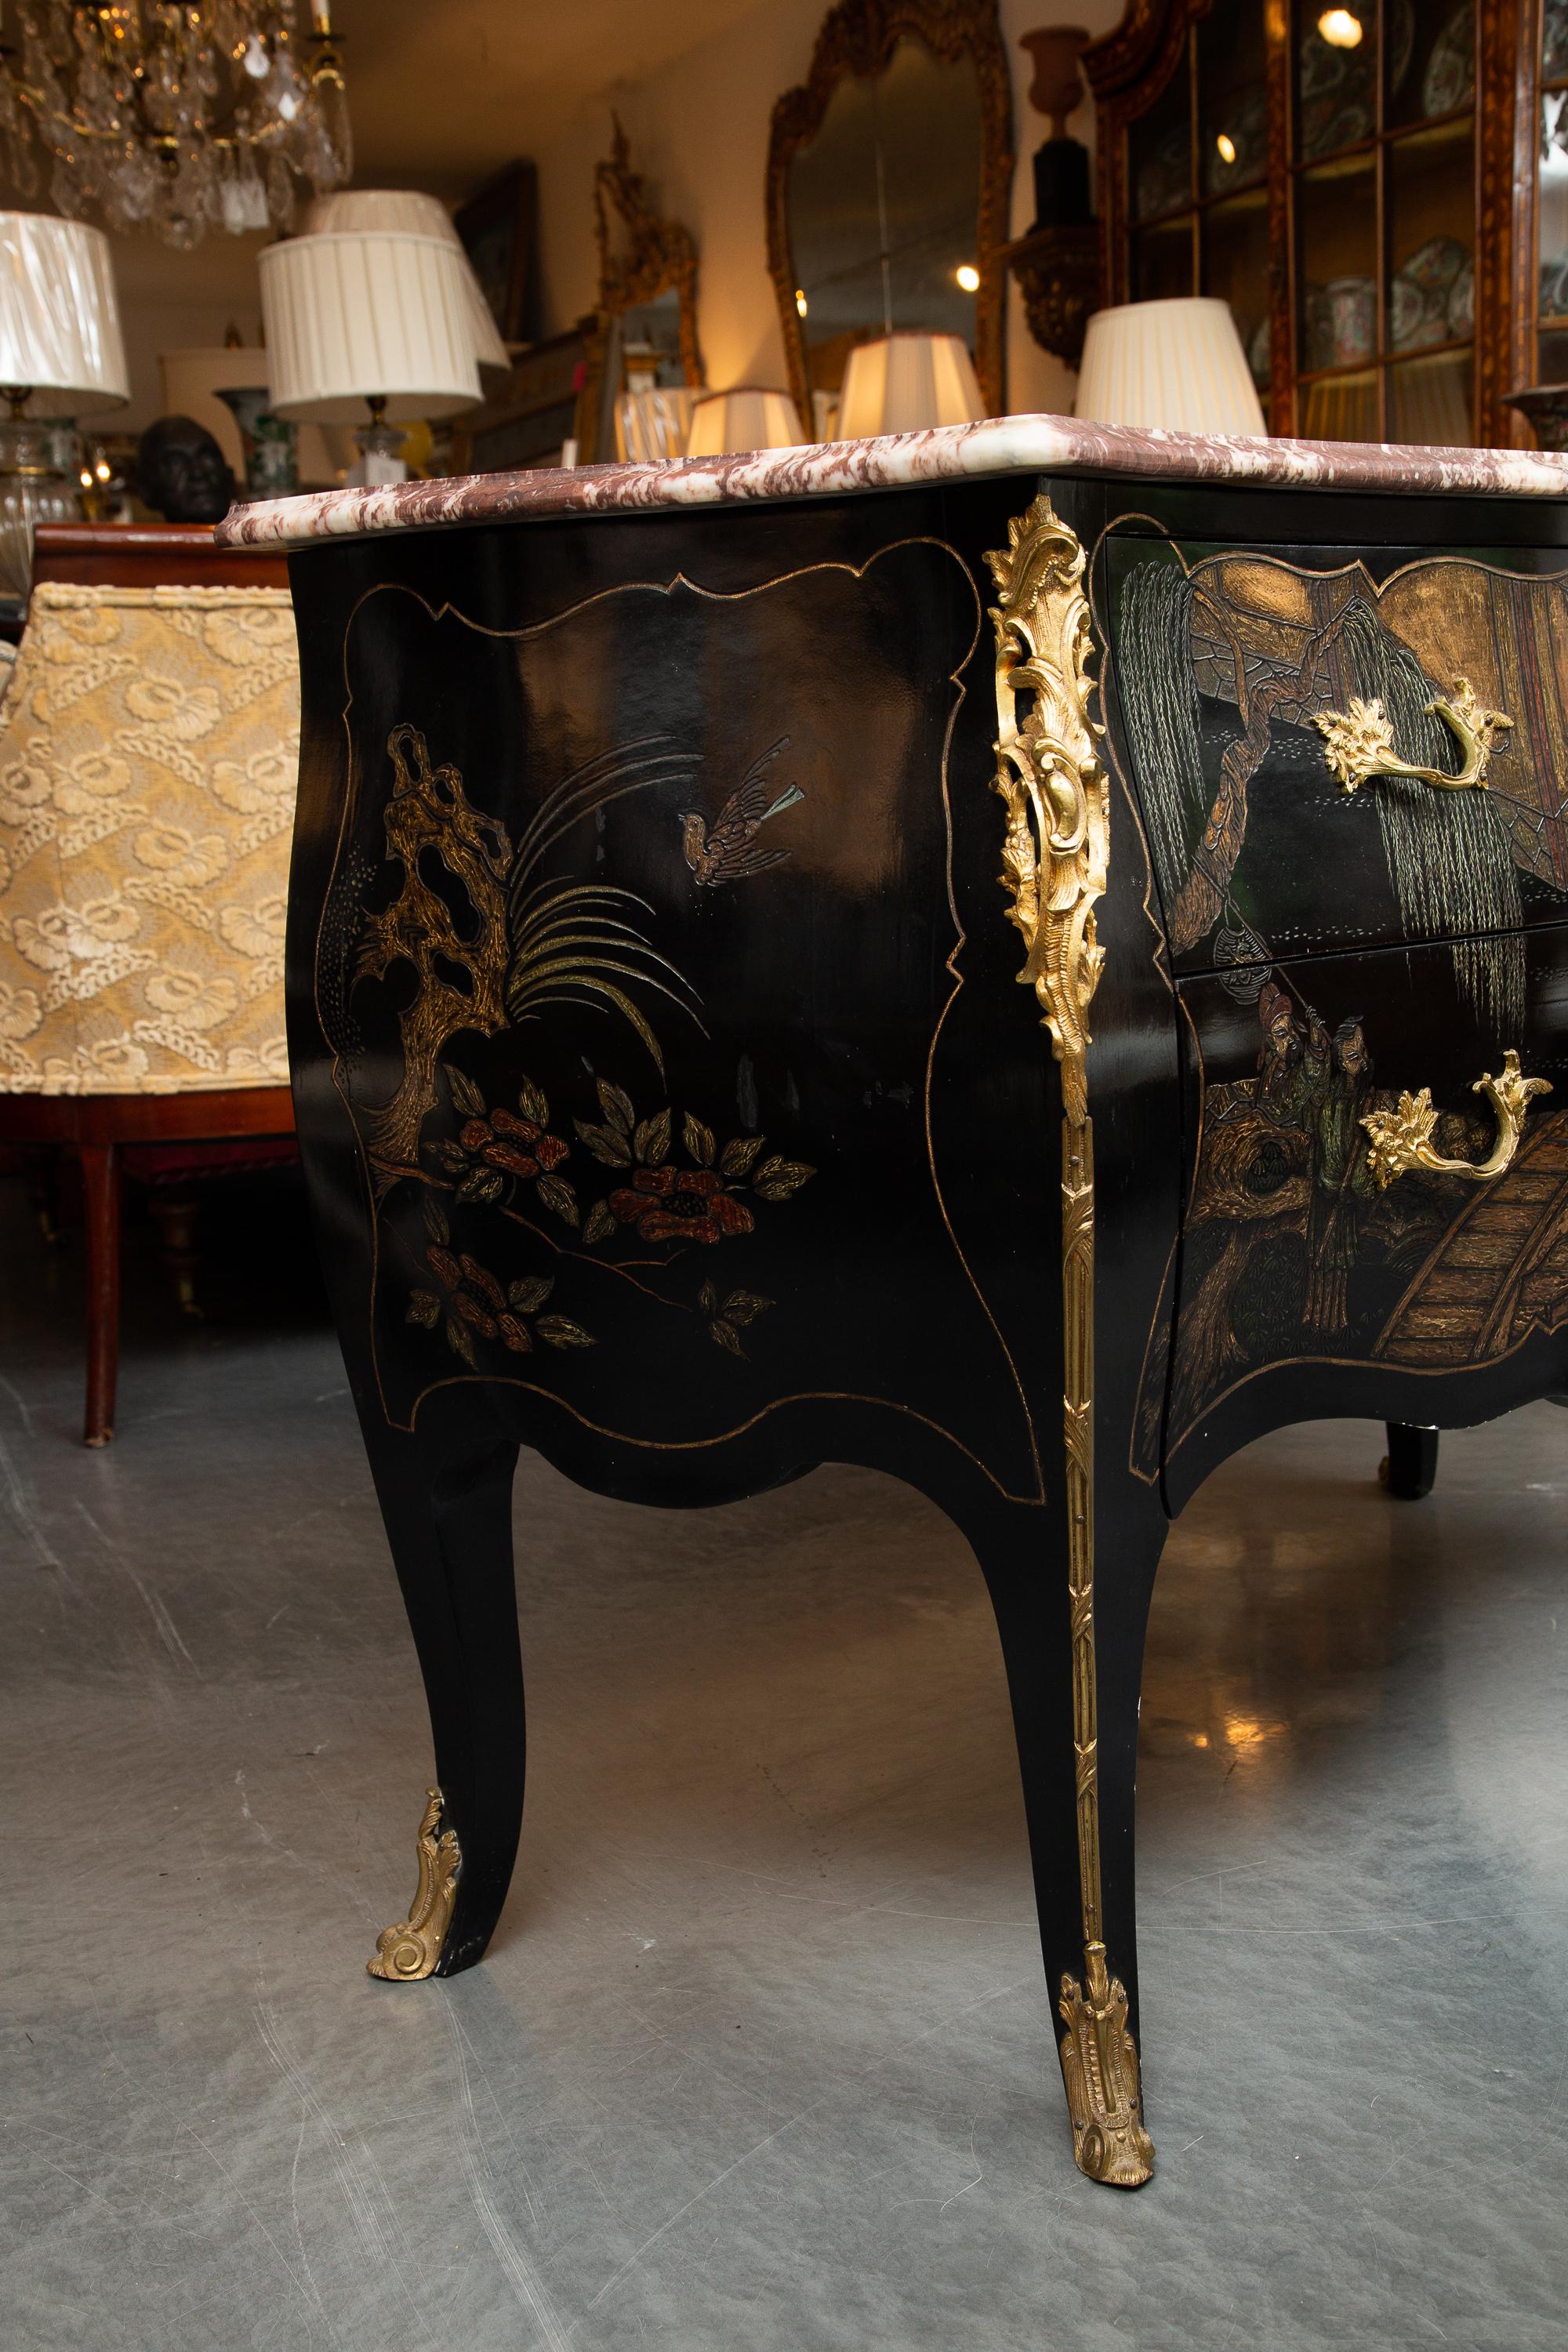 This is a lovely statement-making Louis XV style black lacquered commode, with a variegated marble top, decorated overall with chinoiseries depicting a Chinese village scene.